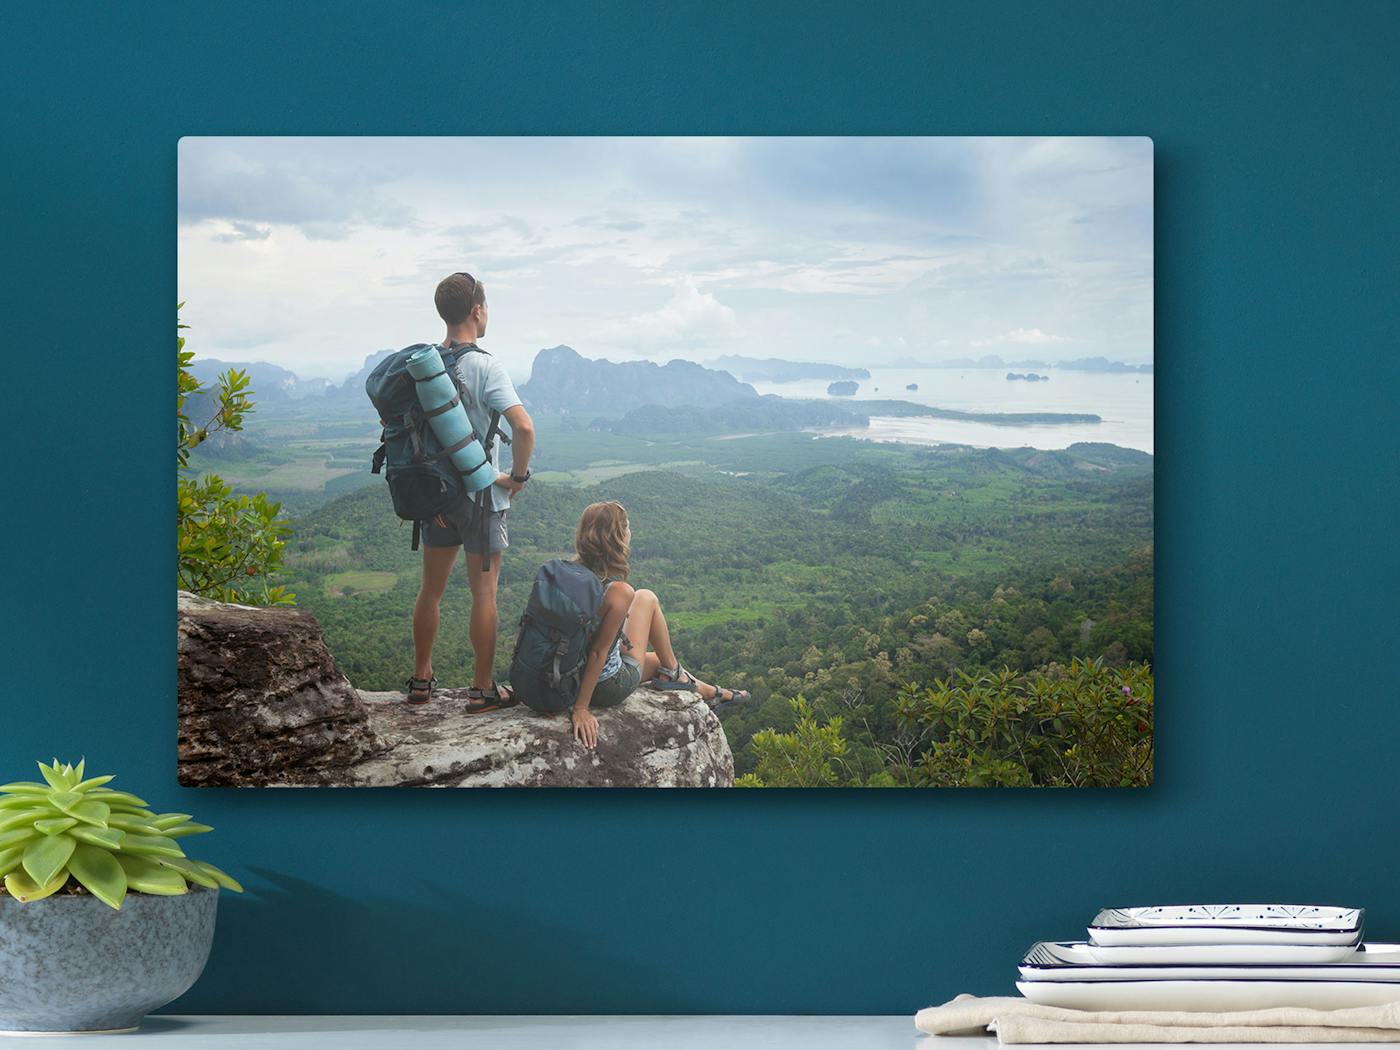 Turn Your Photo to a Stunning Wall Print